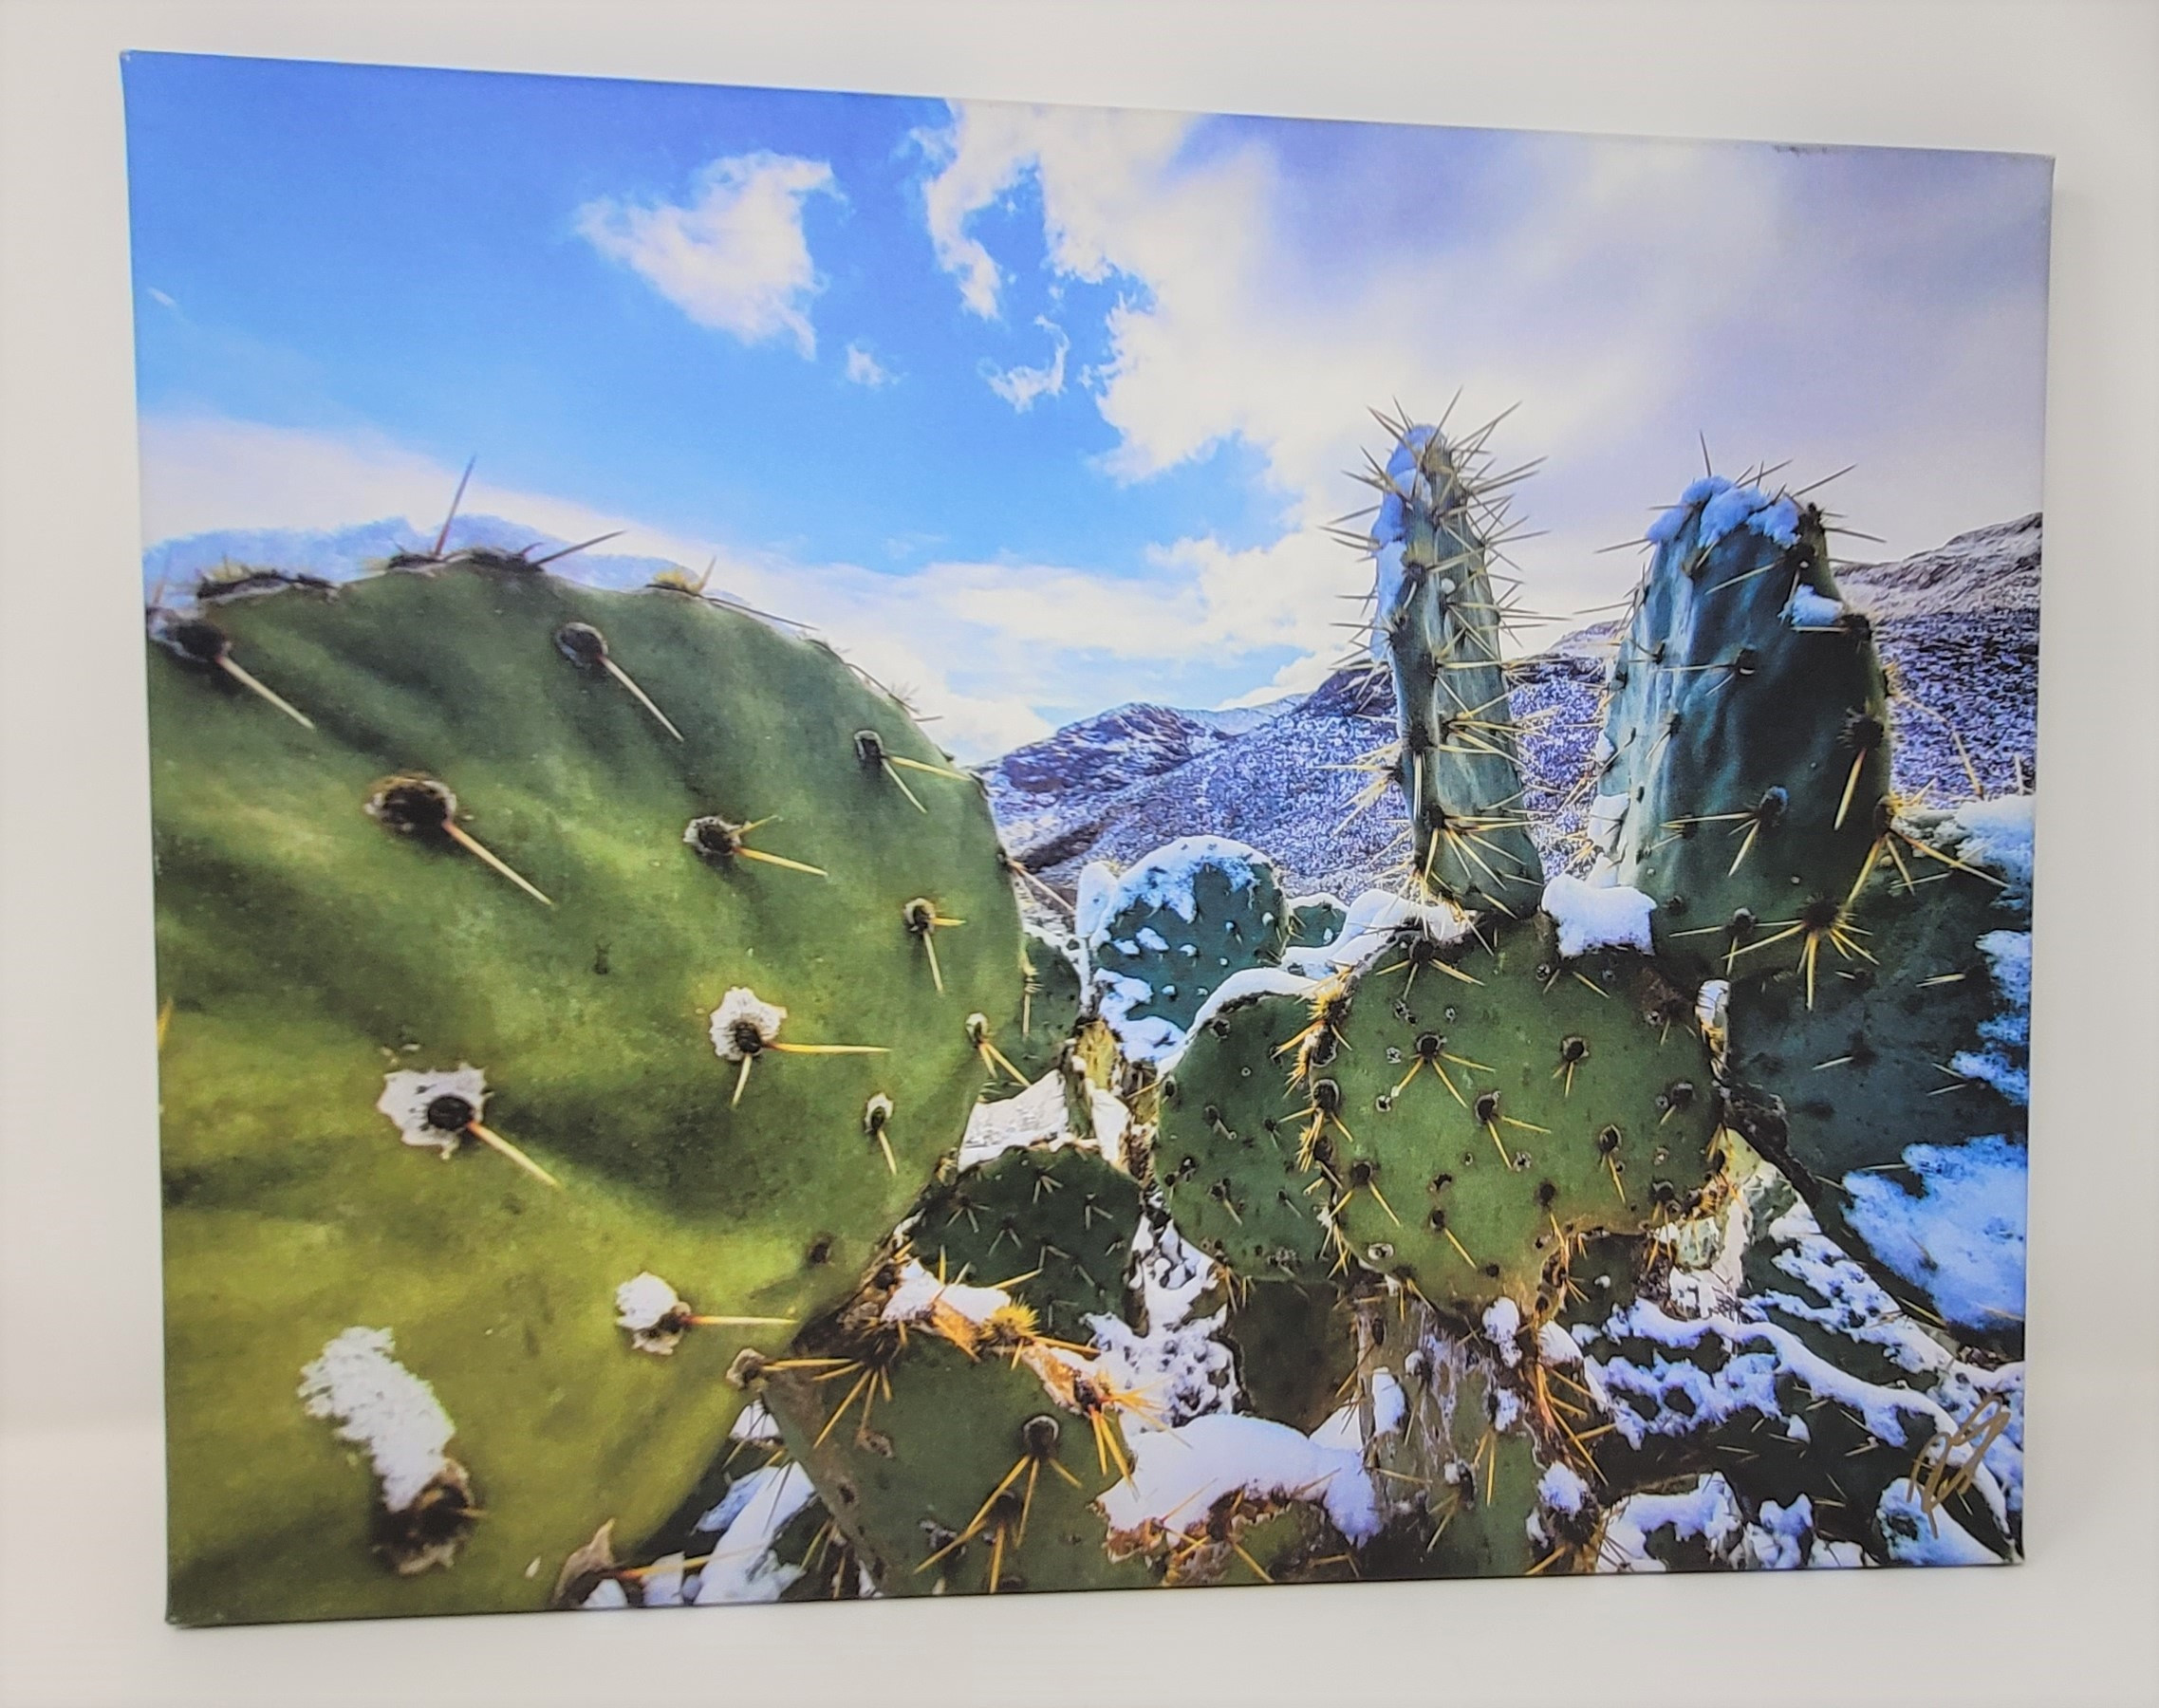 Photograph on stretched canvas- snow on cactus